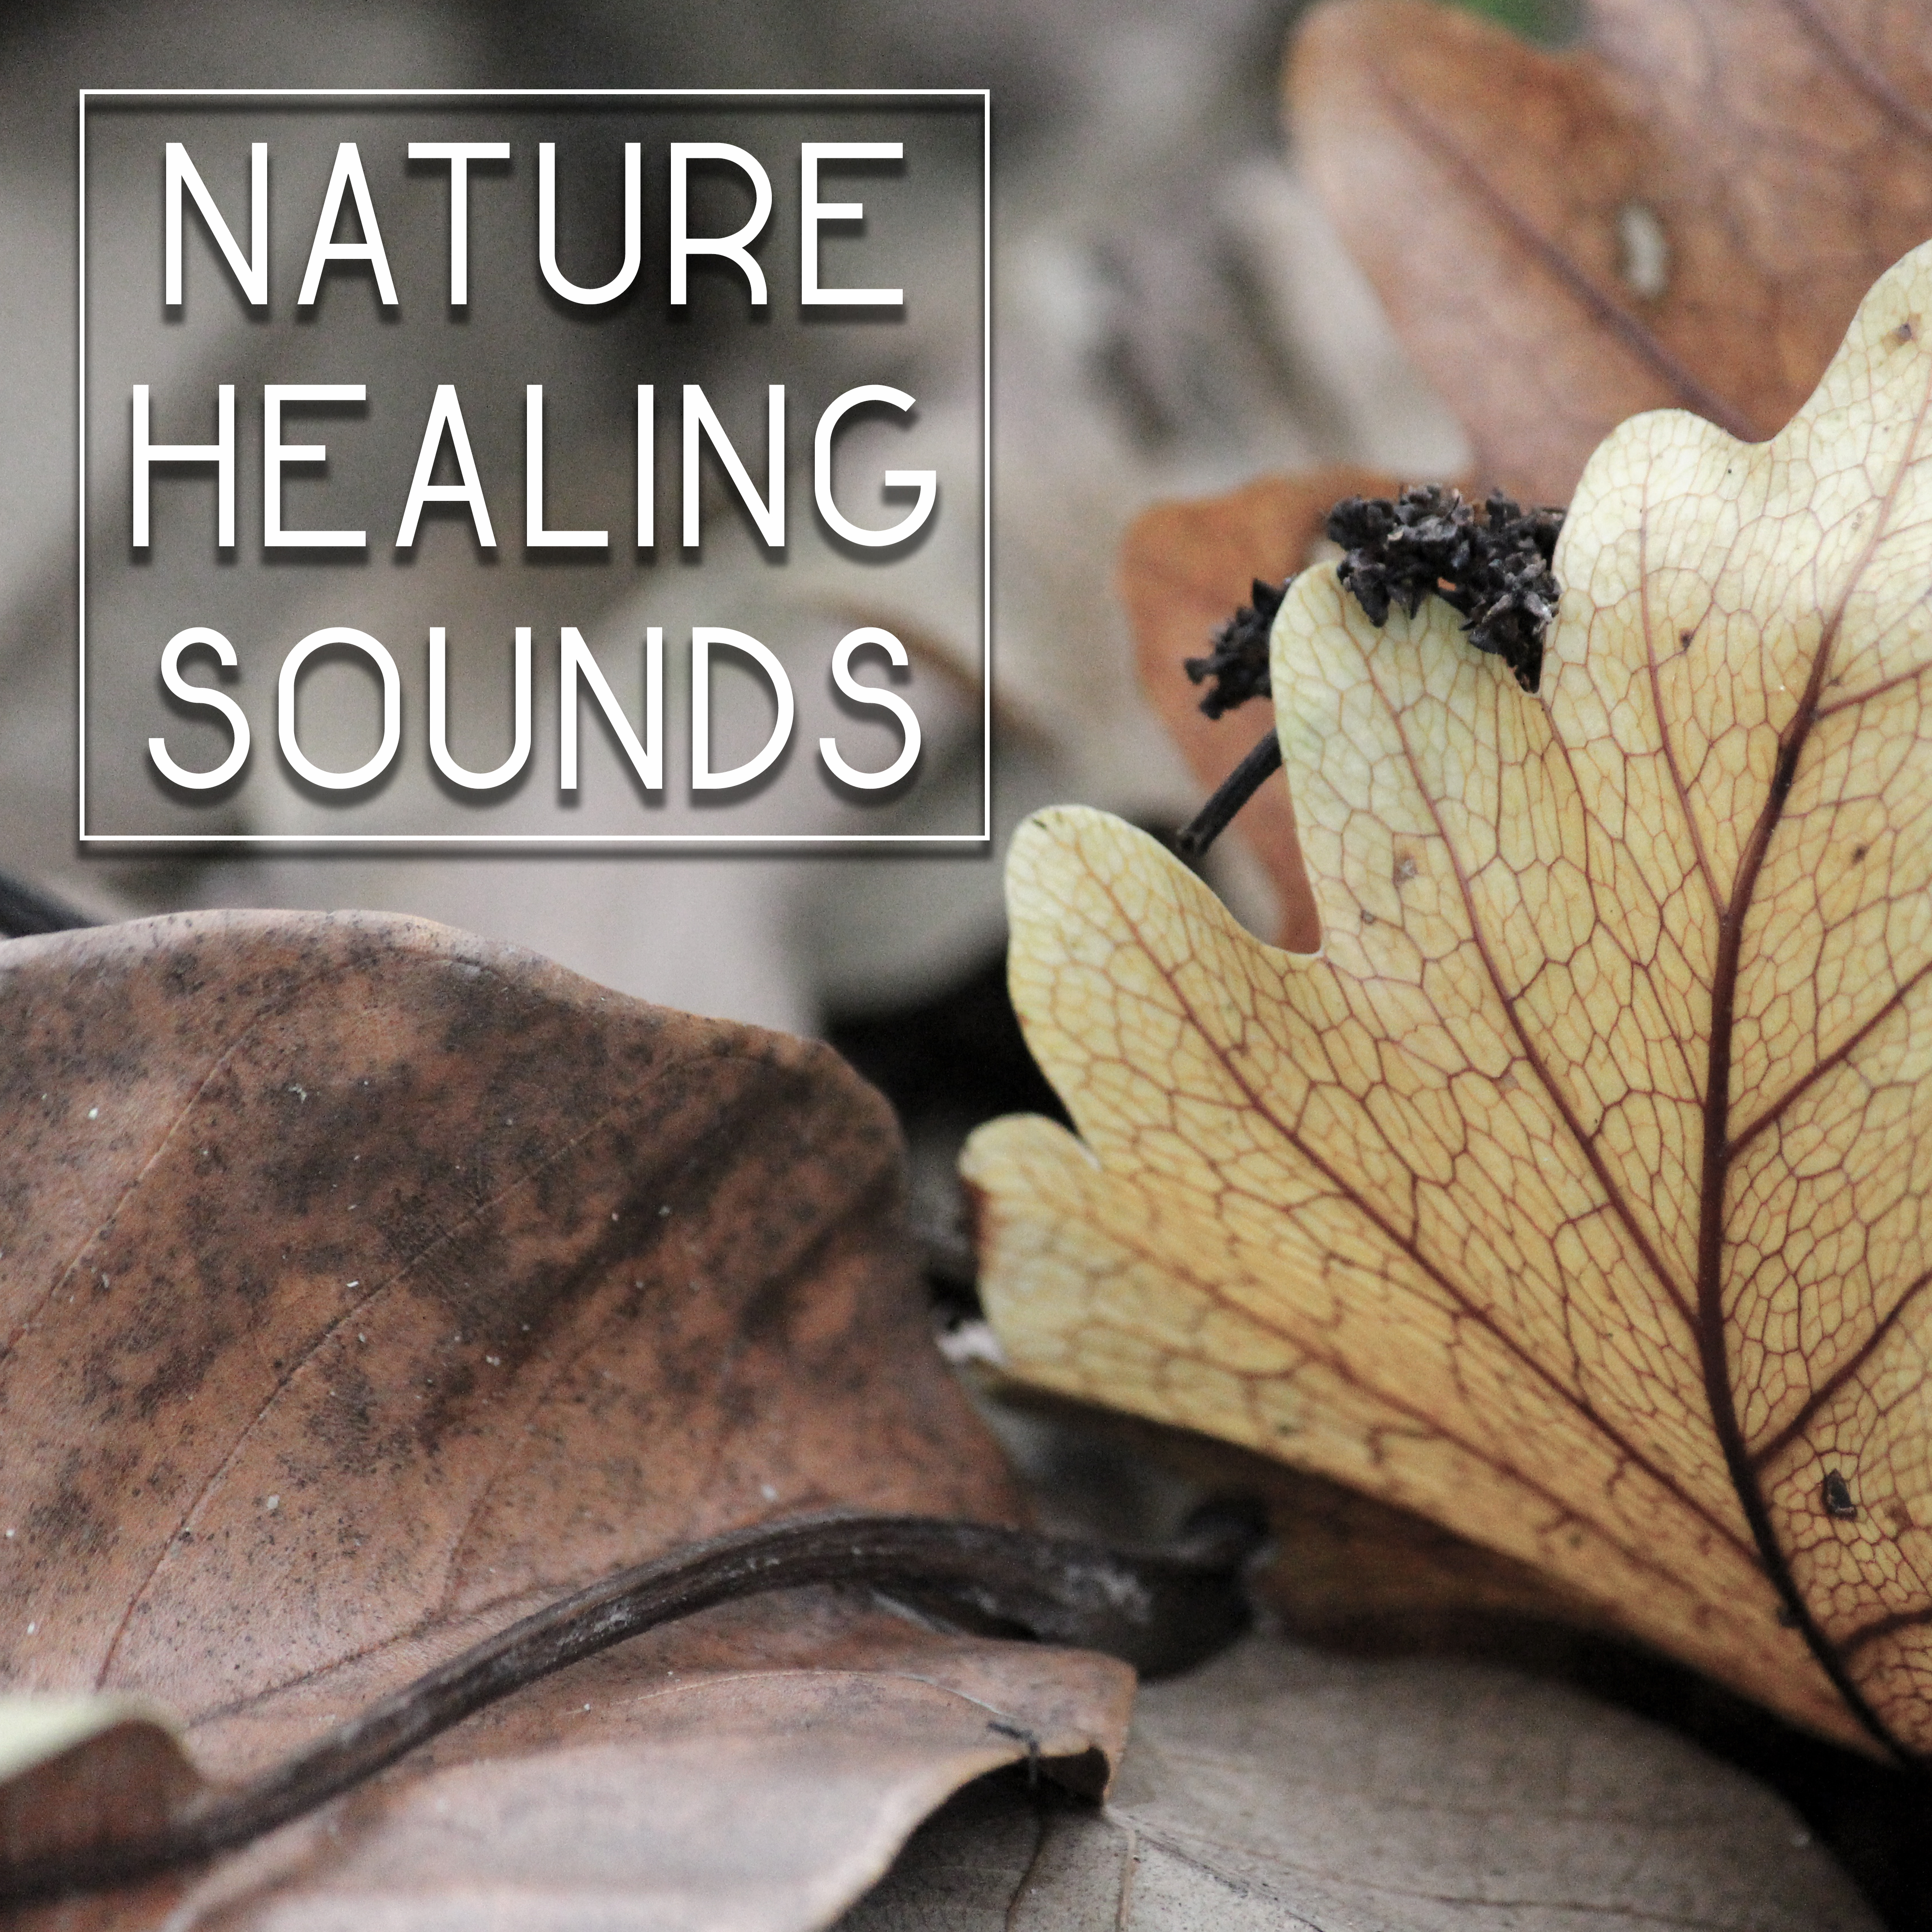 Nature Healing Sounds – Soft Music to Calm Down, Waves of Calmness, Peaceful Sounds, Mind Control